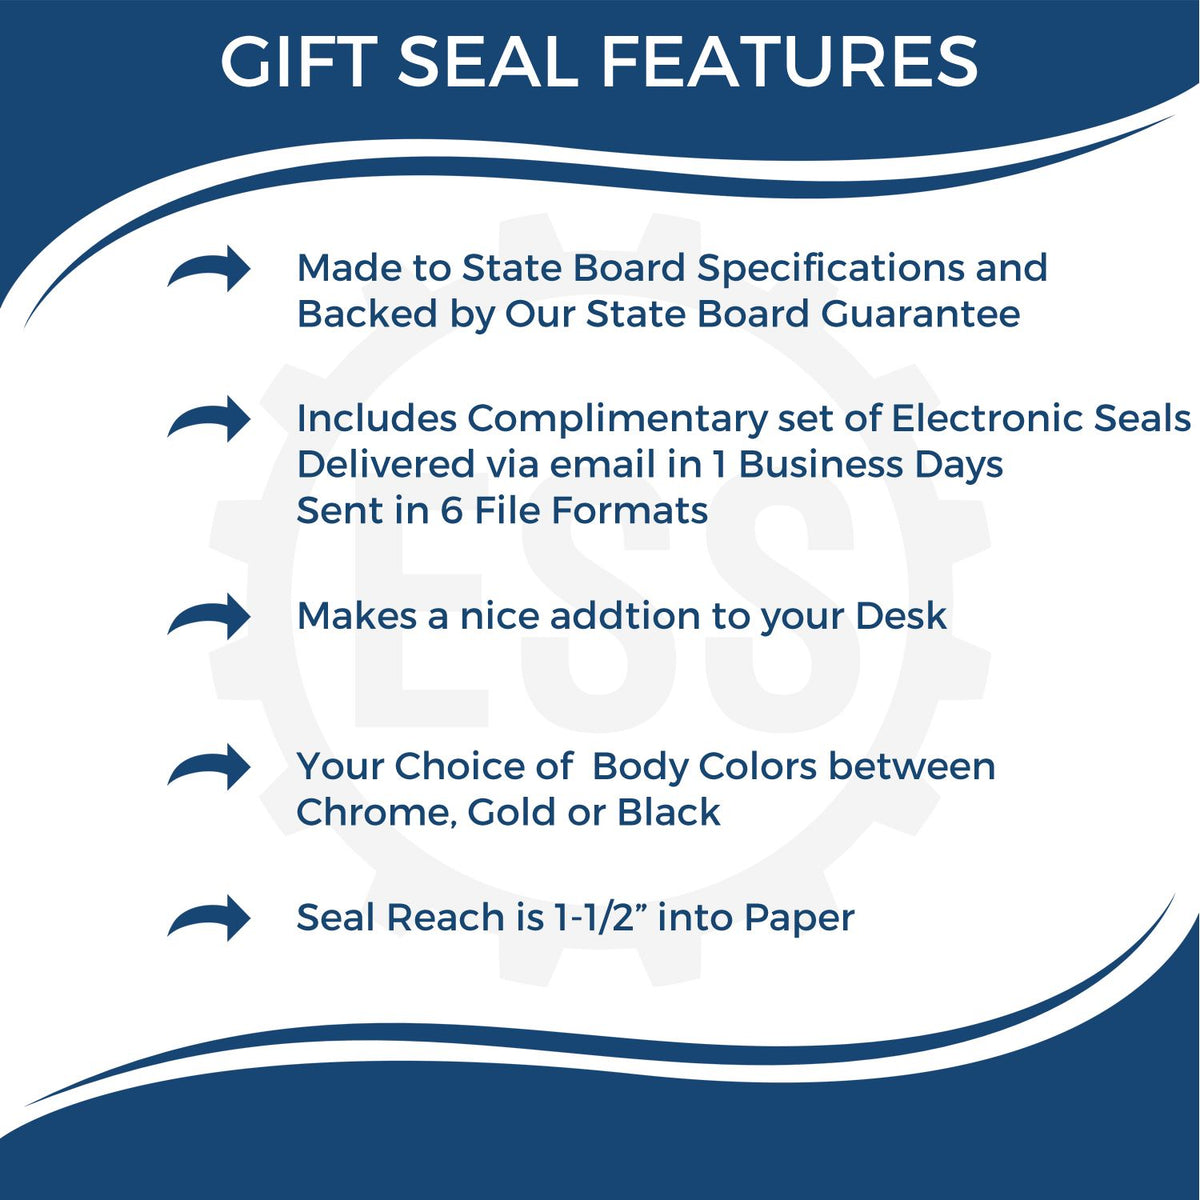 A picture of an infographic highlighting the selling points for the Gift North Carolina Geologist Seal